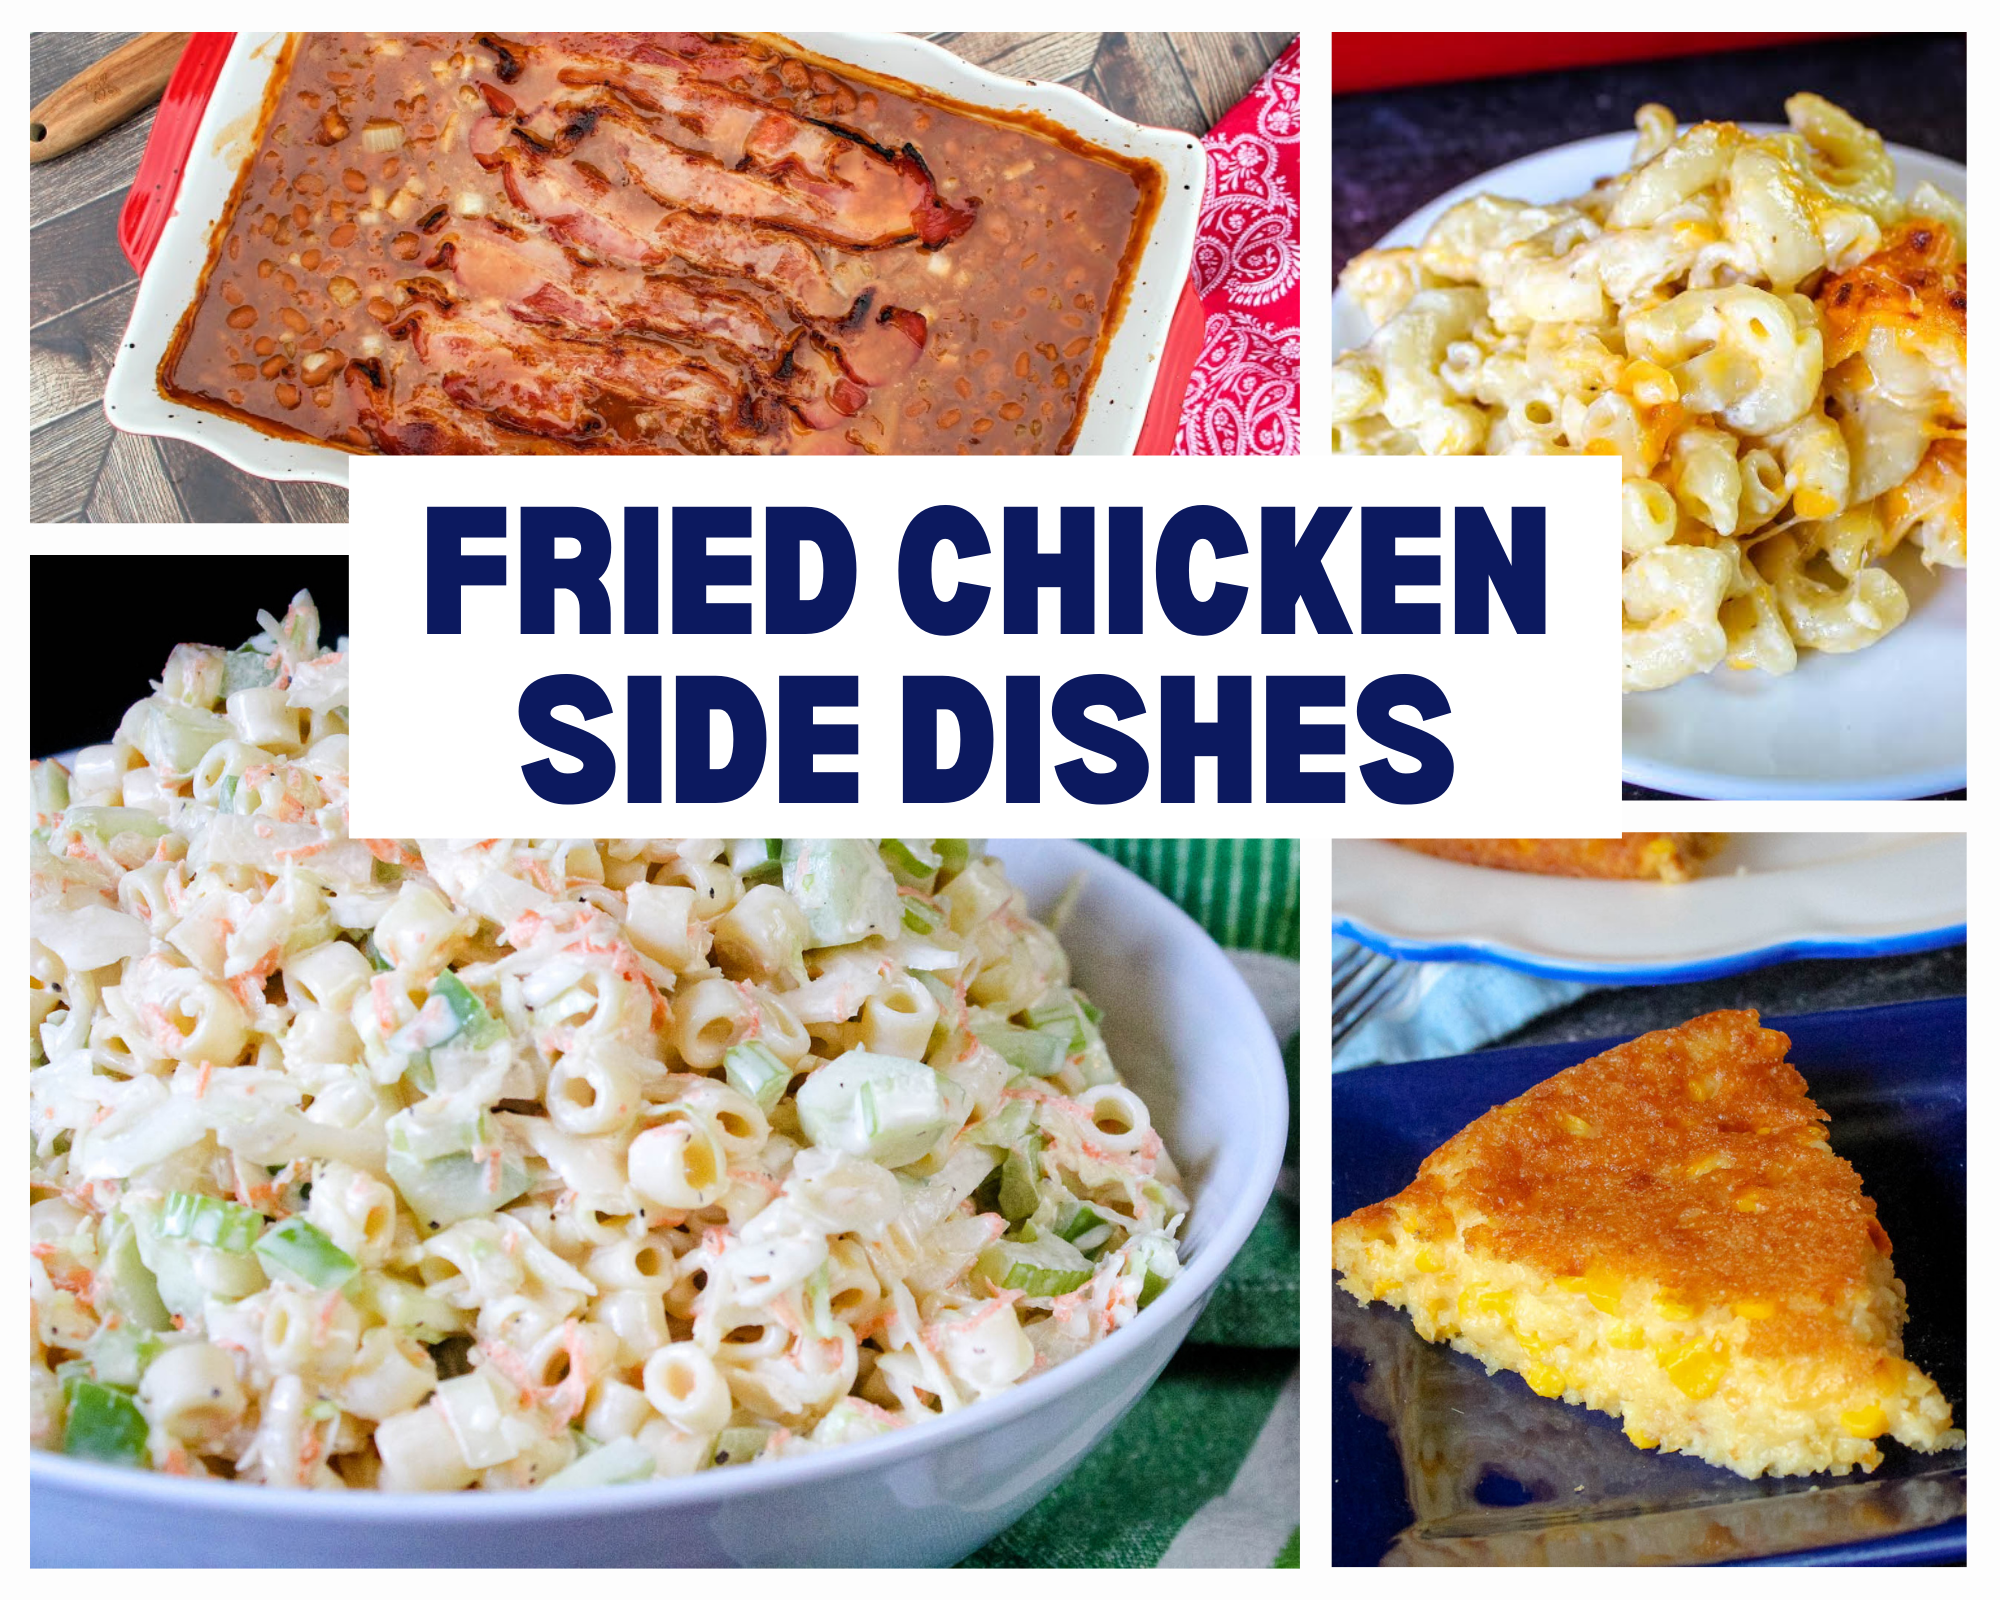 fried chicken side dishes